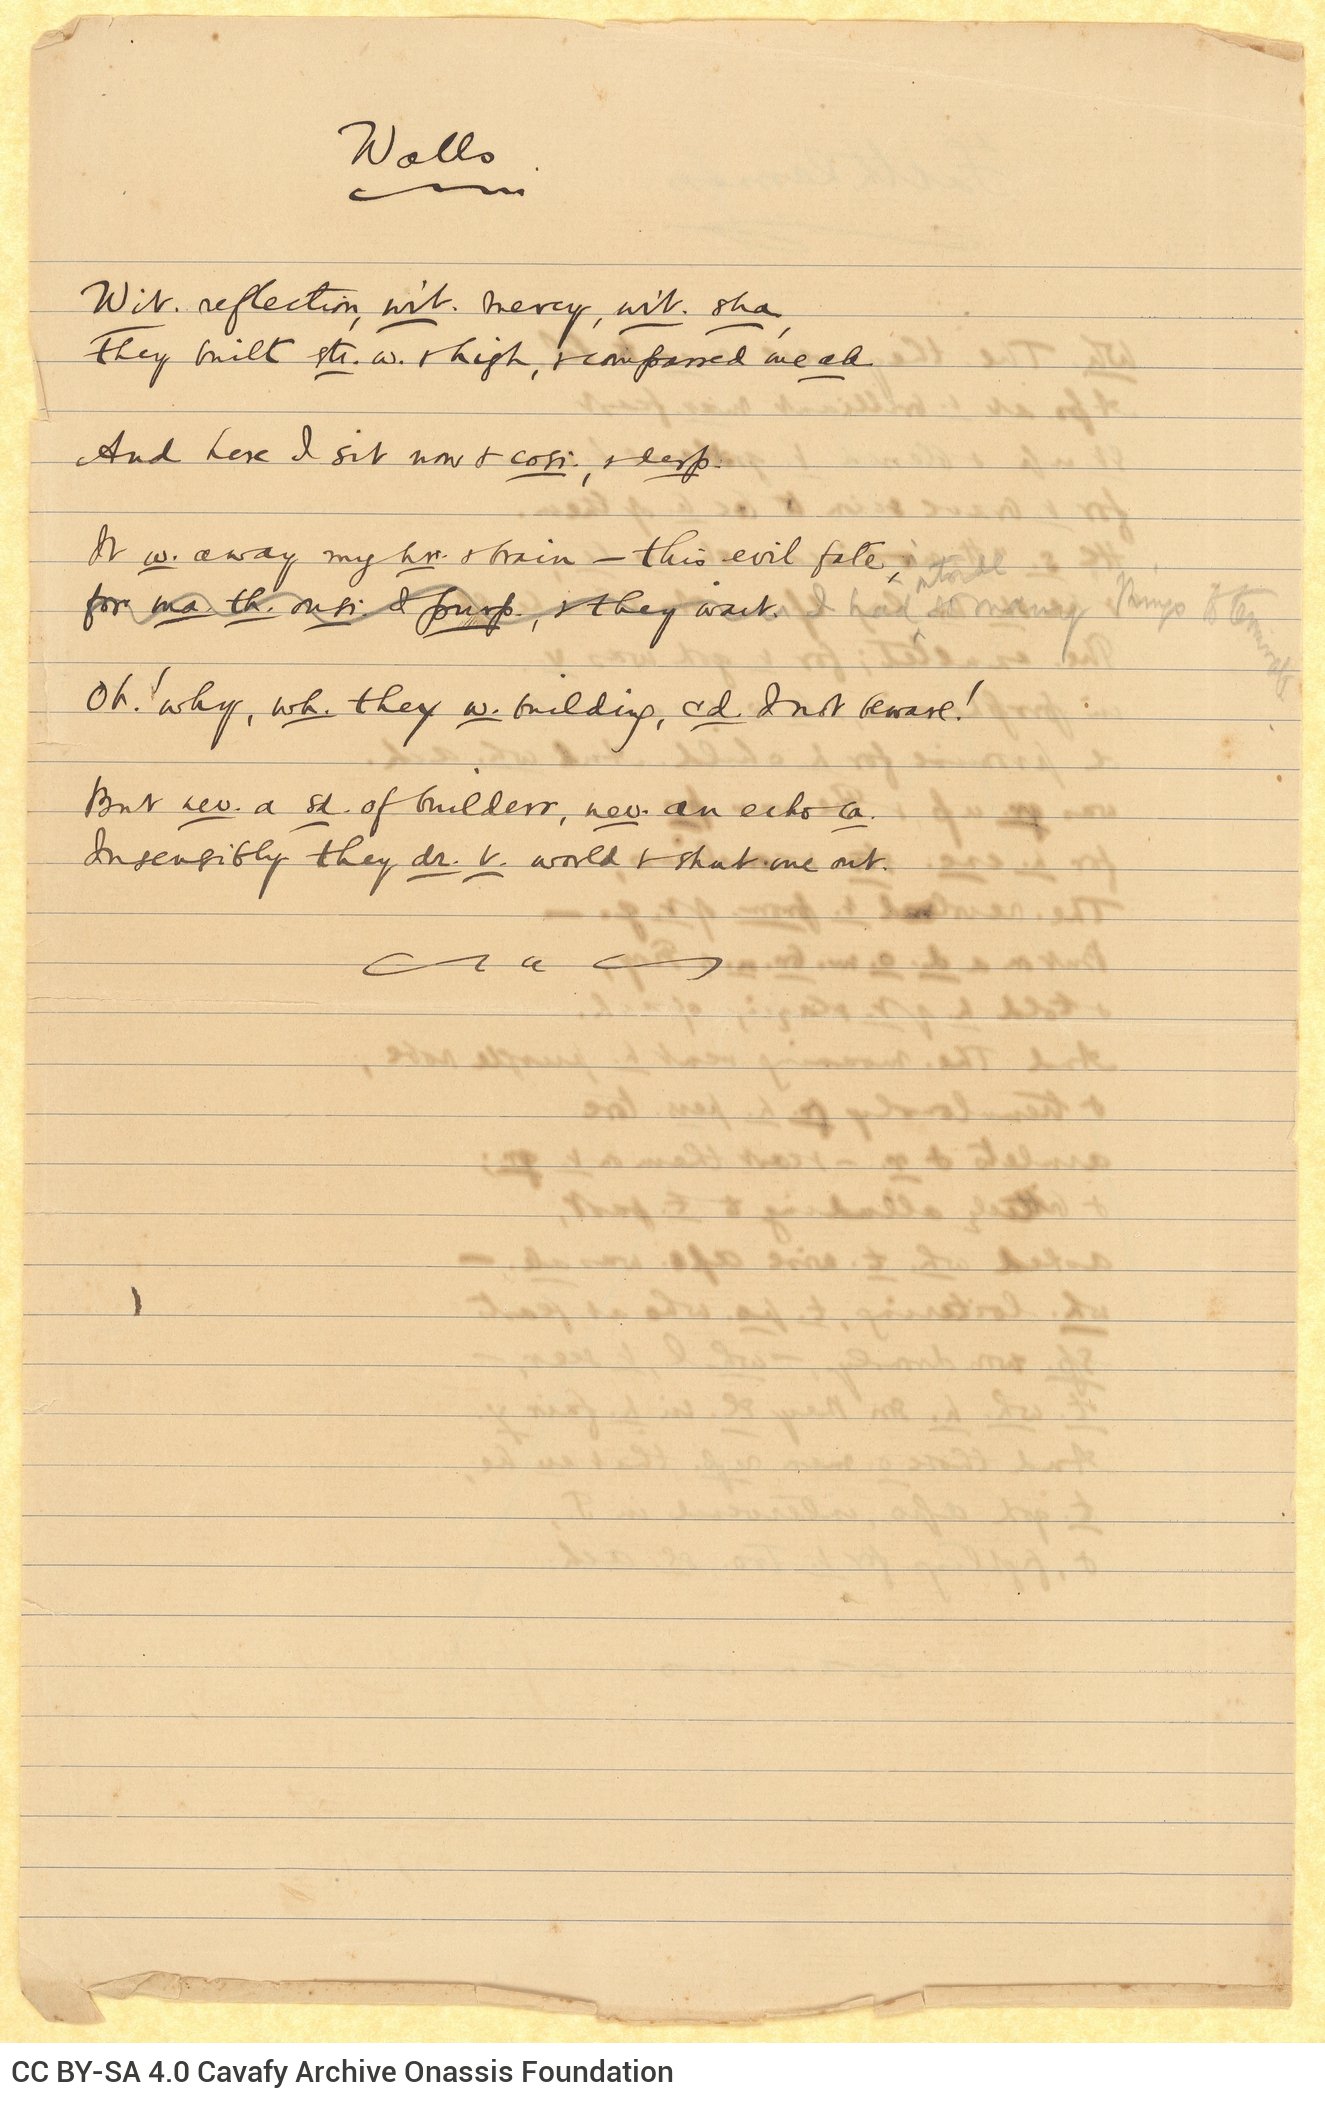 Manuscript by Cavafy with the English translation of the poem "Faithlessness" on the recto of a ruled sheet. The poem has 